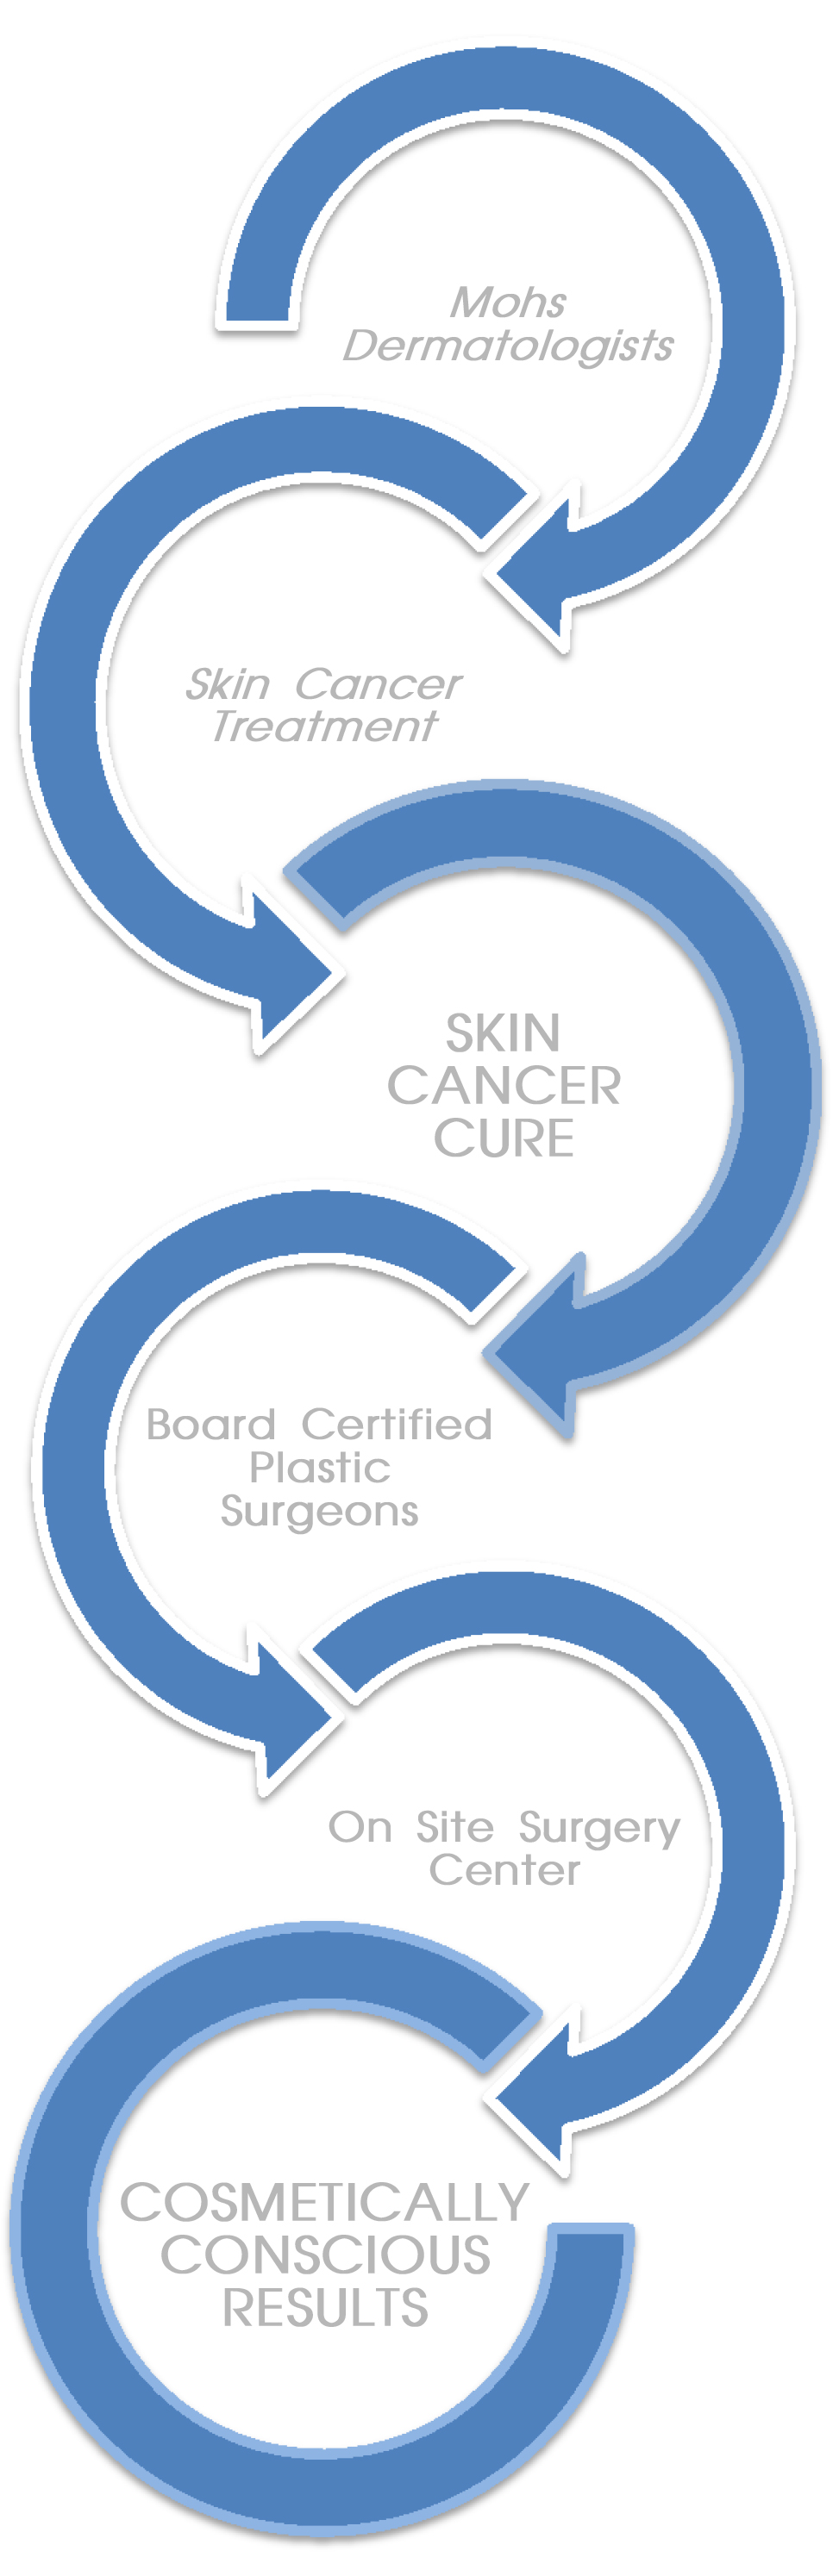 Skin Cancer Specialists